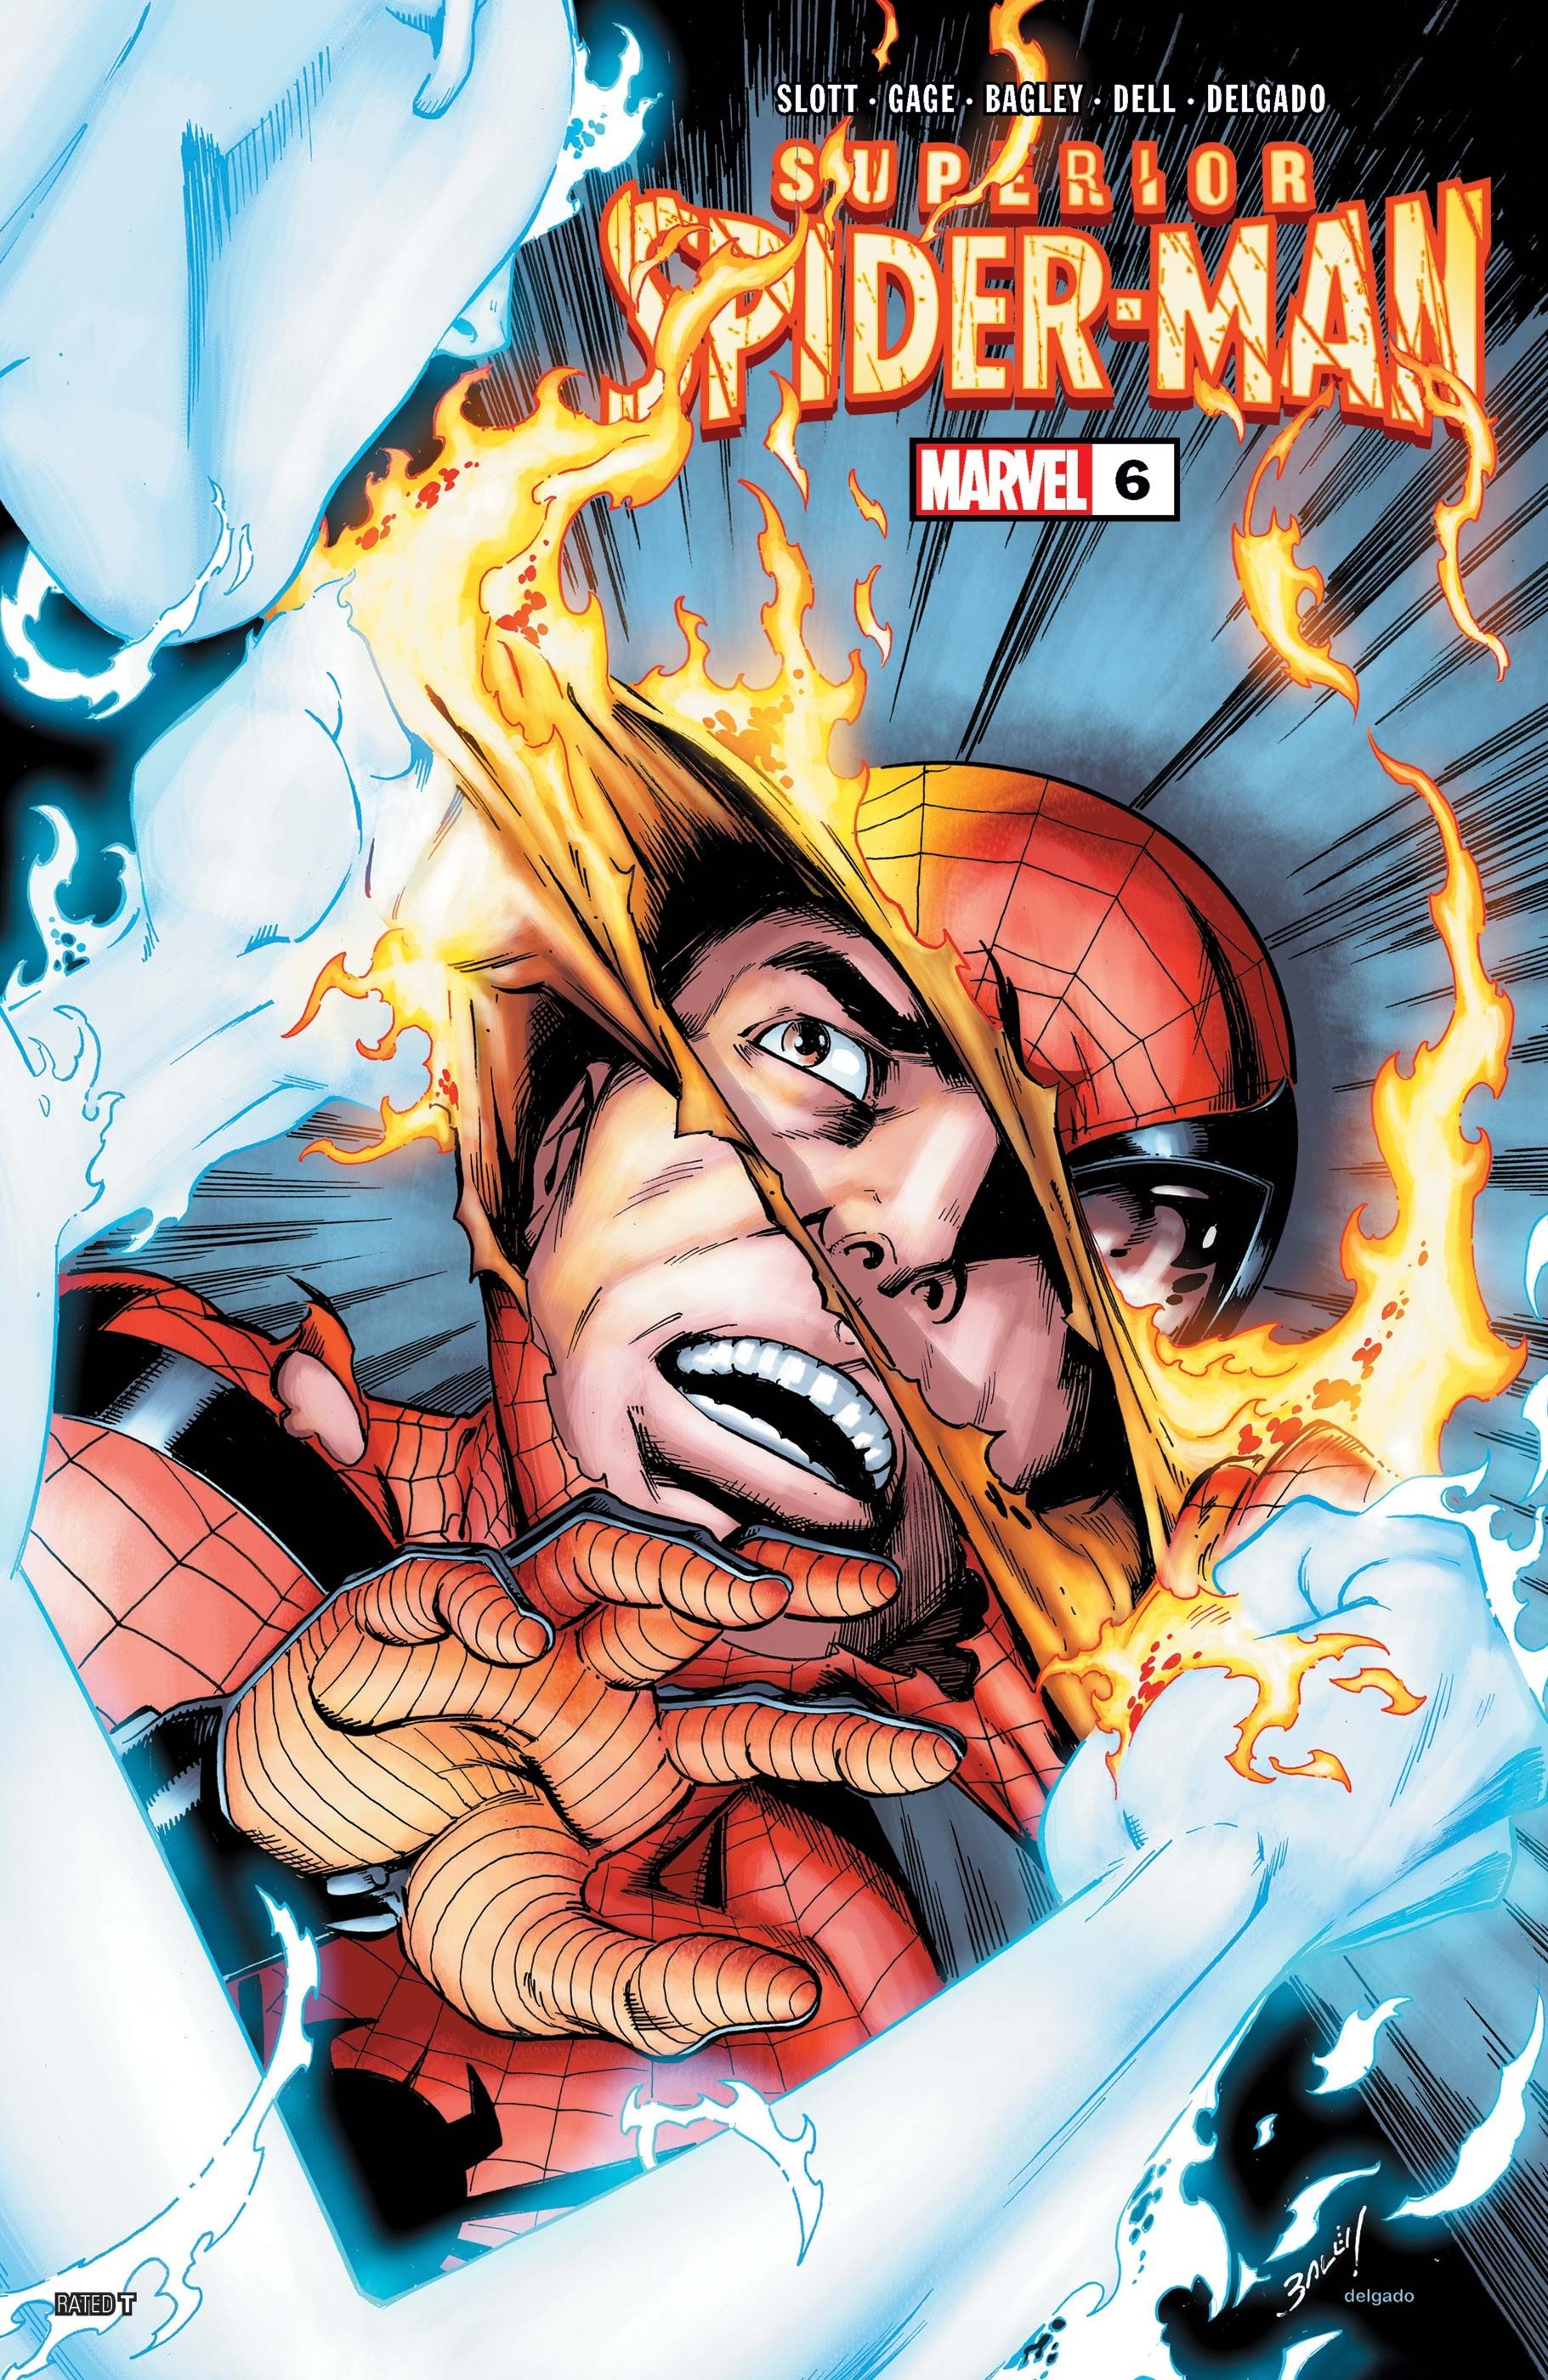 Superior Spider-Man #6 cover, Supernova rips the mask off Spider-Man's face with her flaming hands.